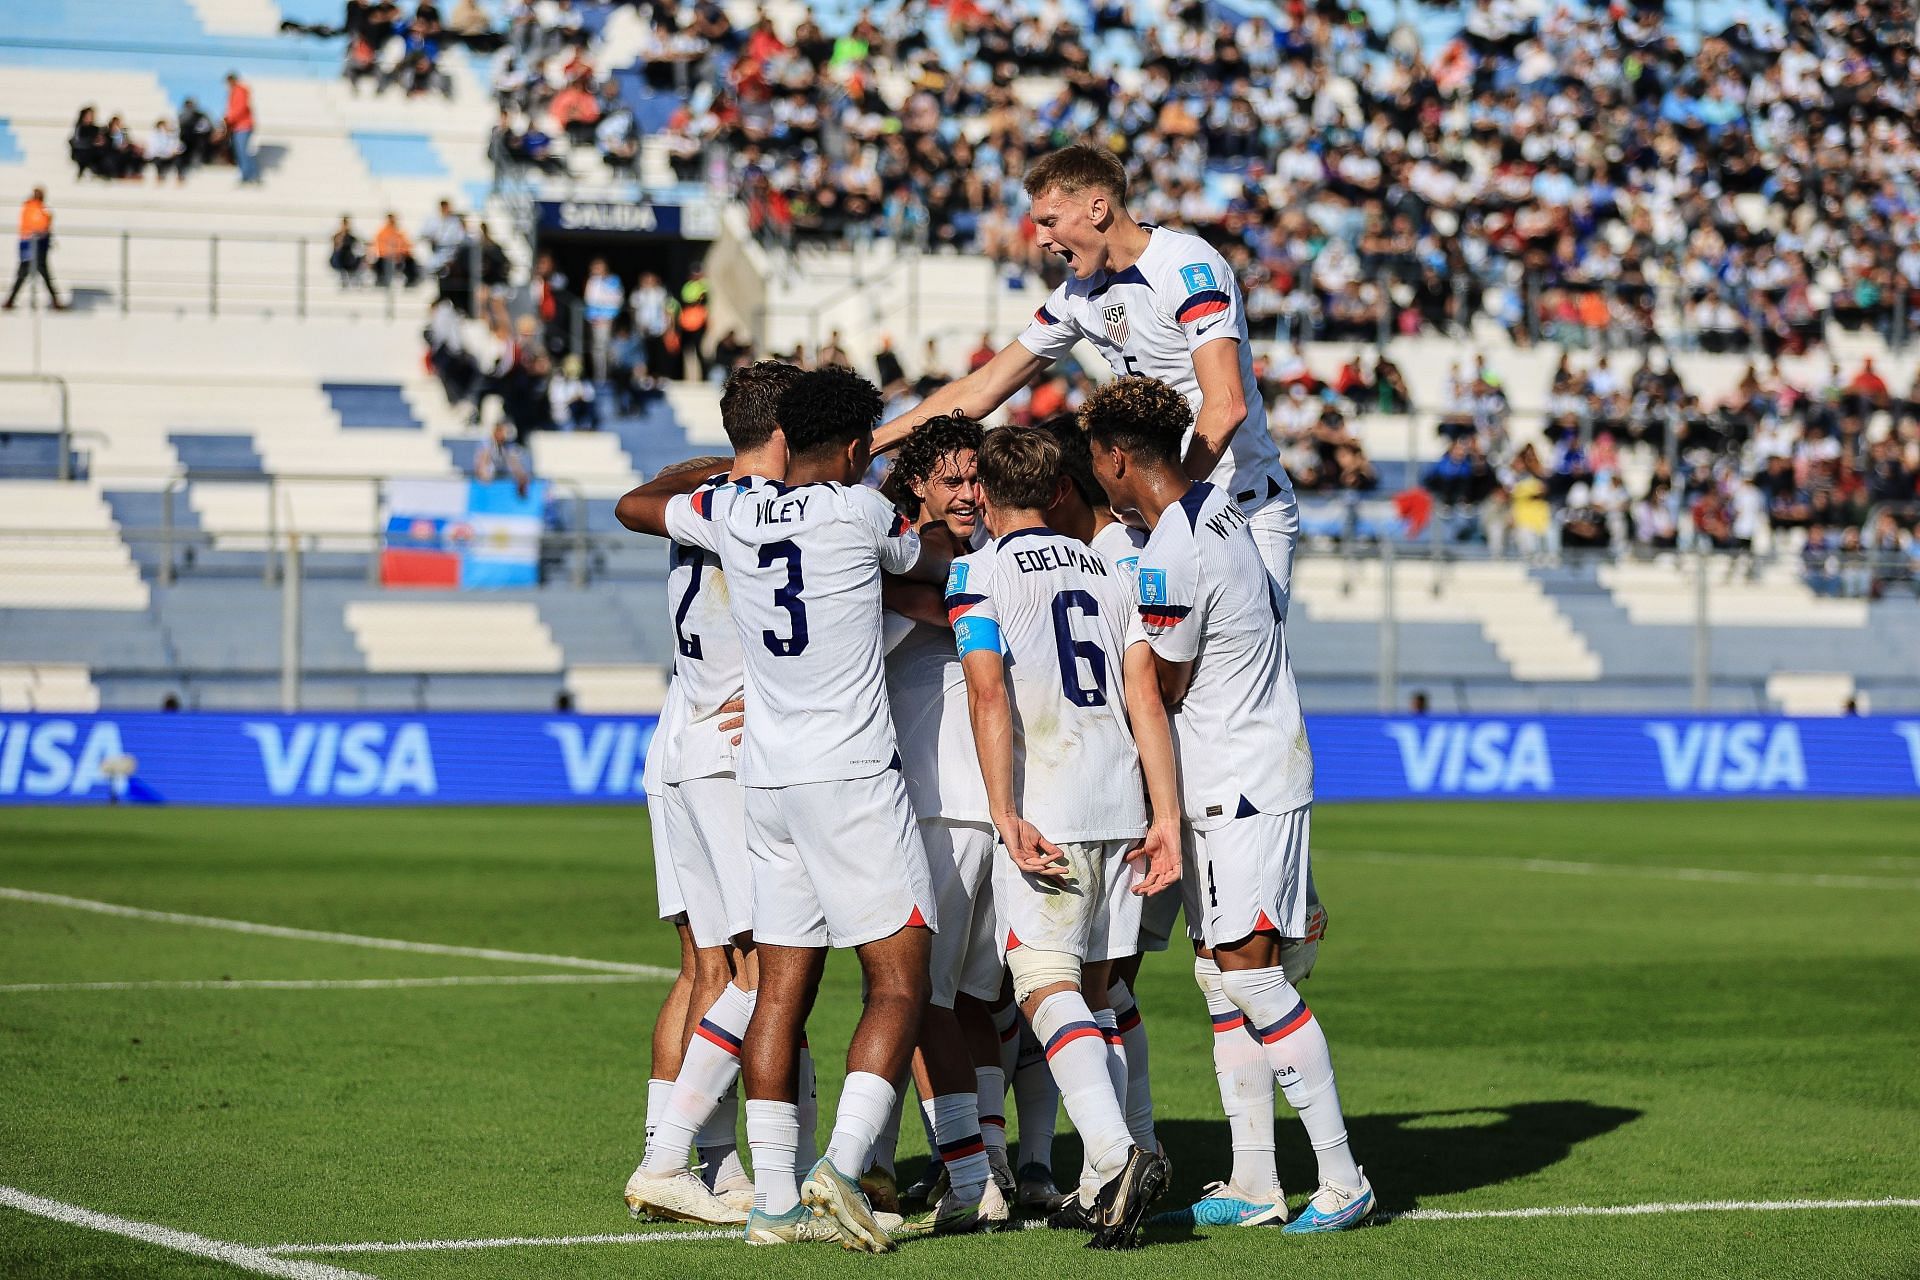 USA and New Zealand meet in the knockout round of the U20 FIFA World Cup on Tuesday